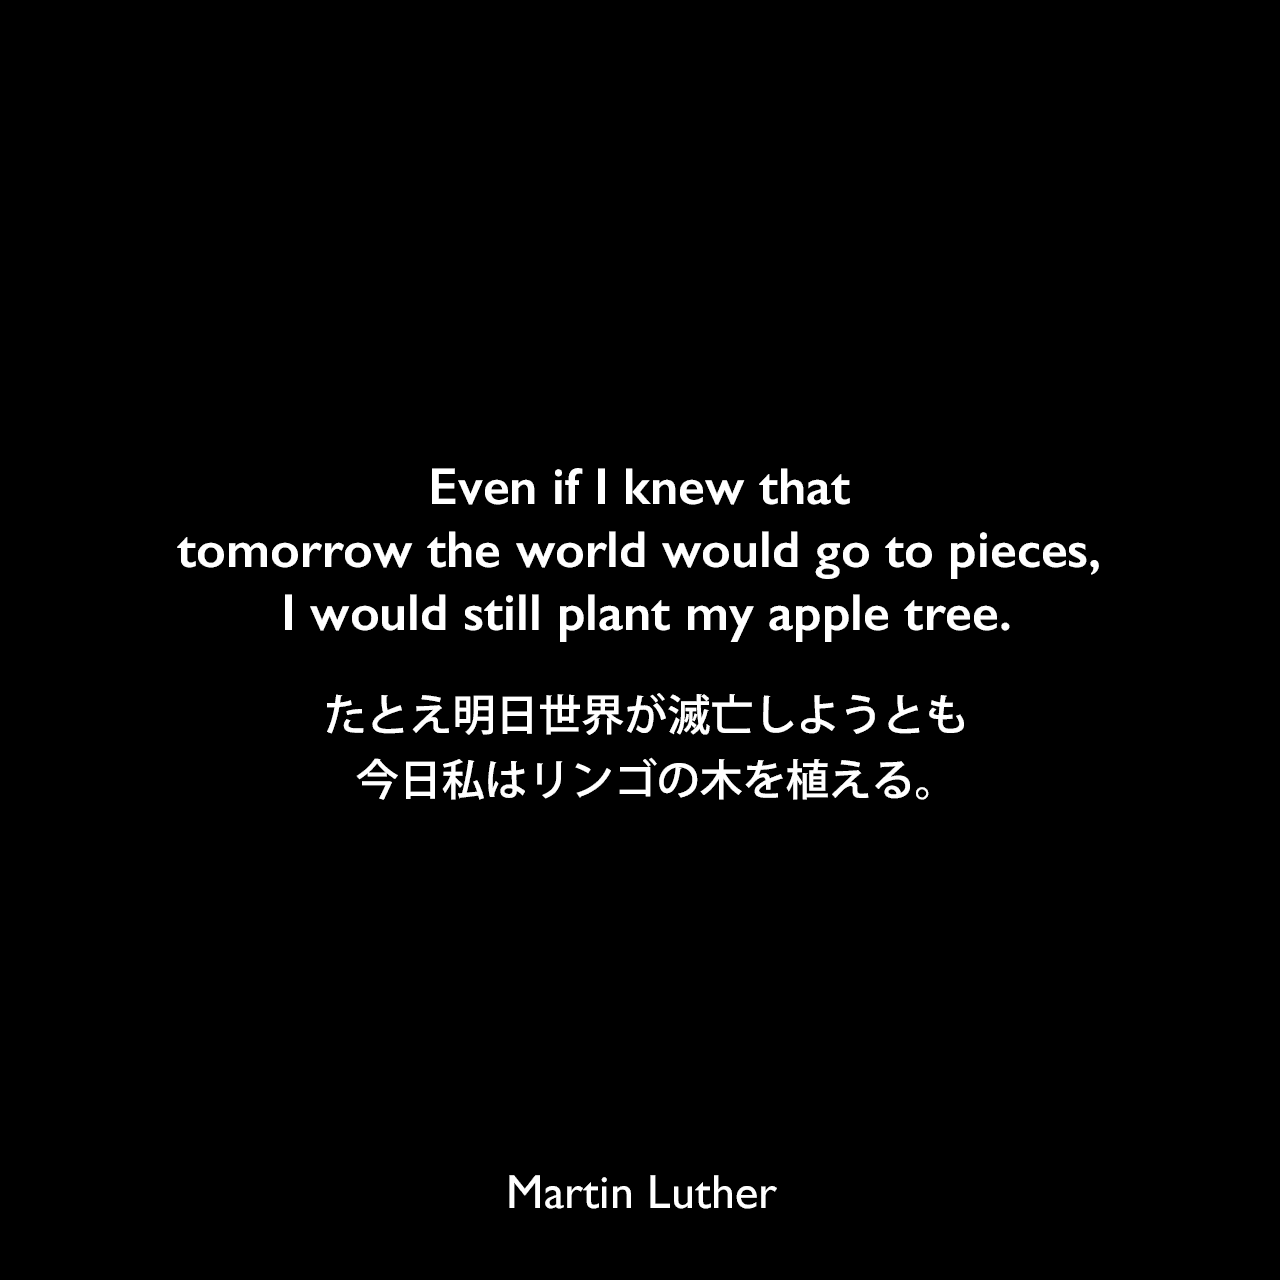 Even if I knew that tomorrow the world would go to pieces, I would still plant my apple tree.たとえ明日世界が滅亡しようとも、今日私はリンゴの木を植える。Martin Luther